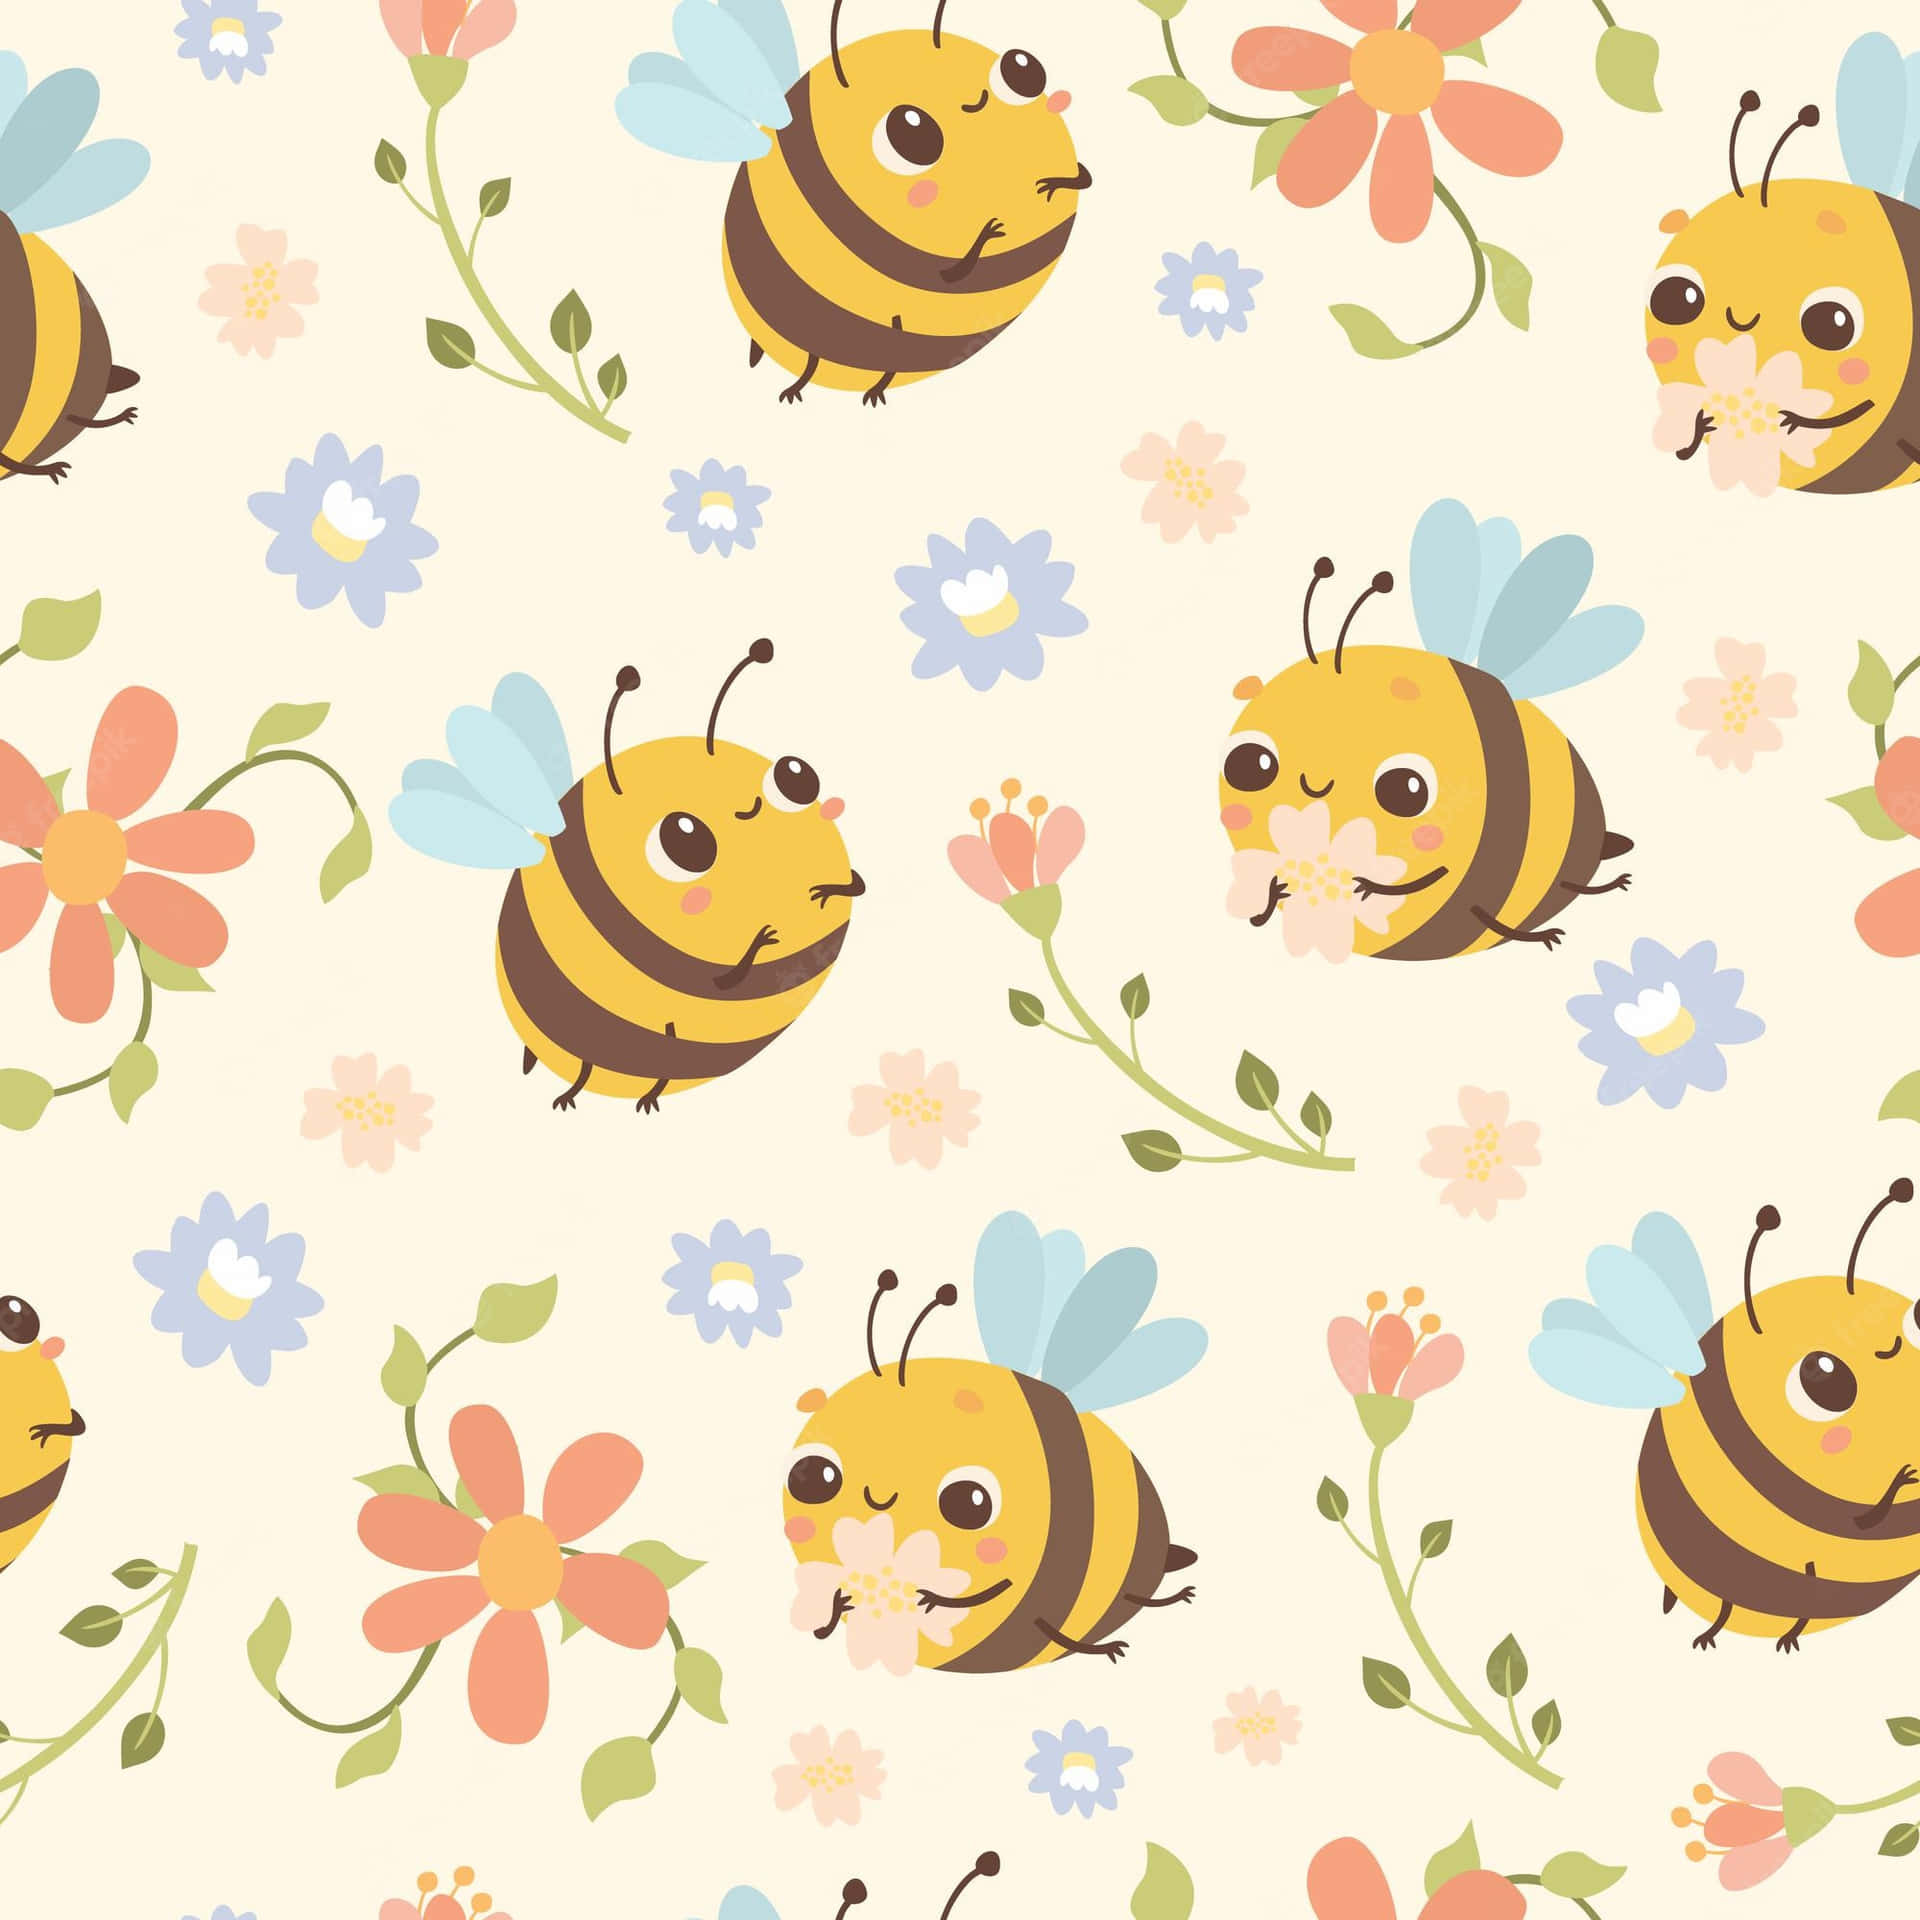 “The best vintage items are found at Vintage Bee” Wallpaper